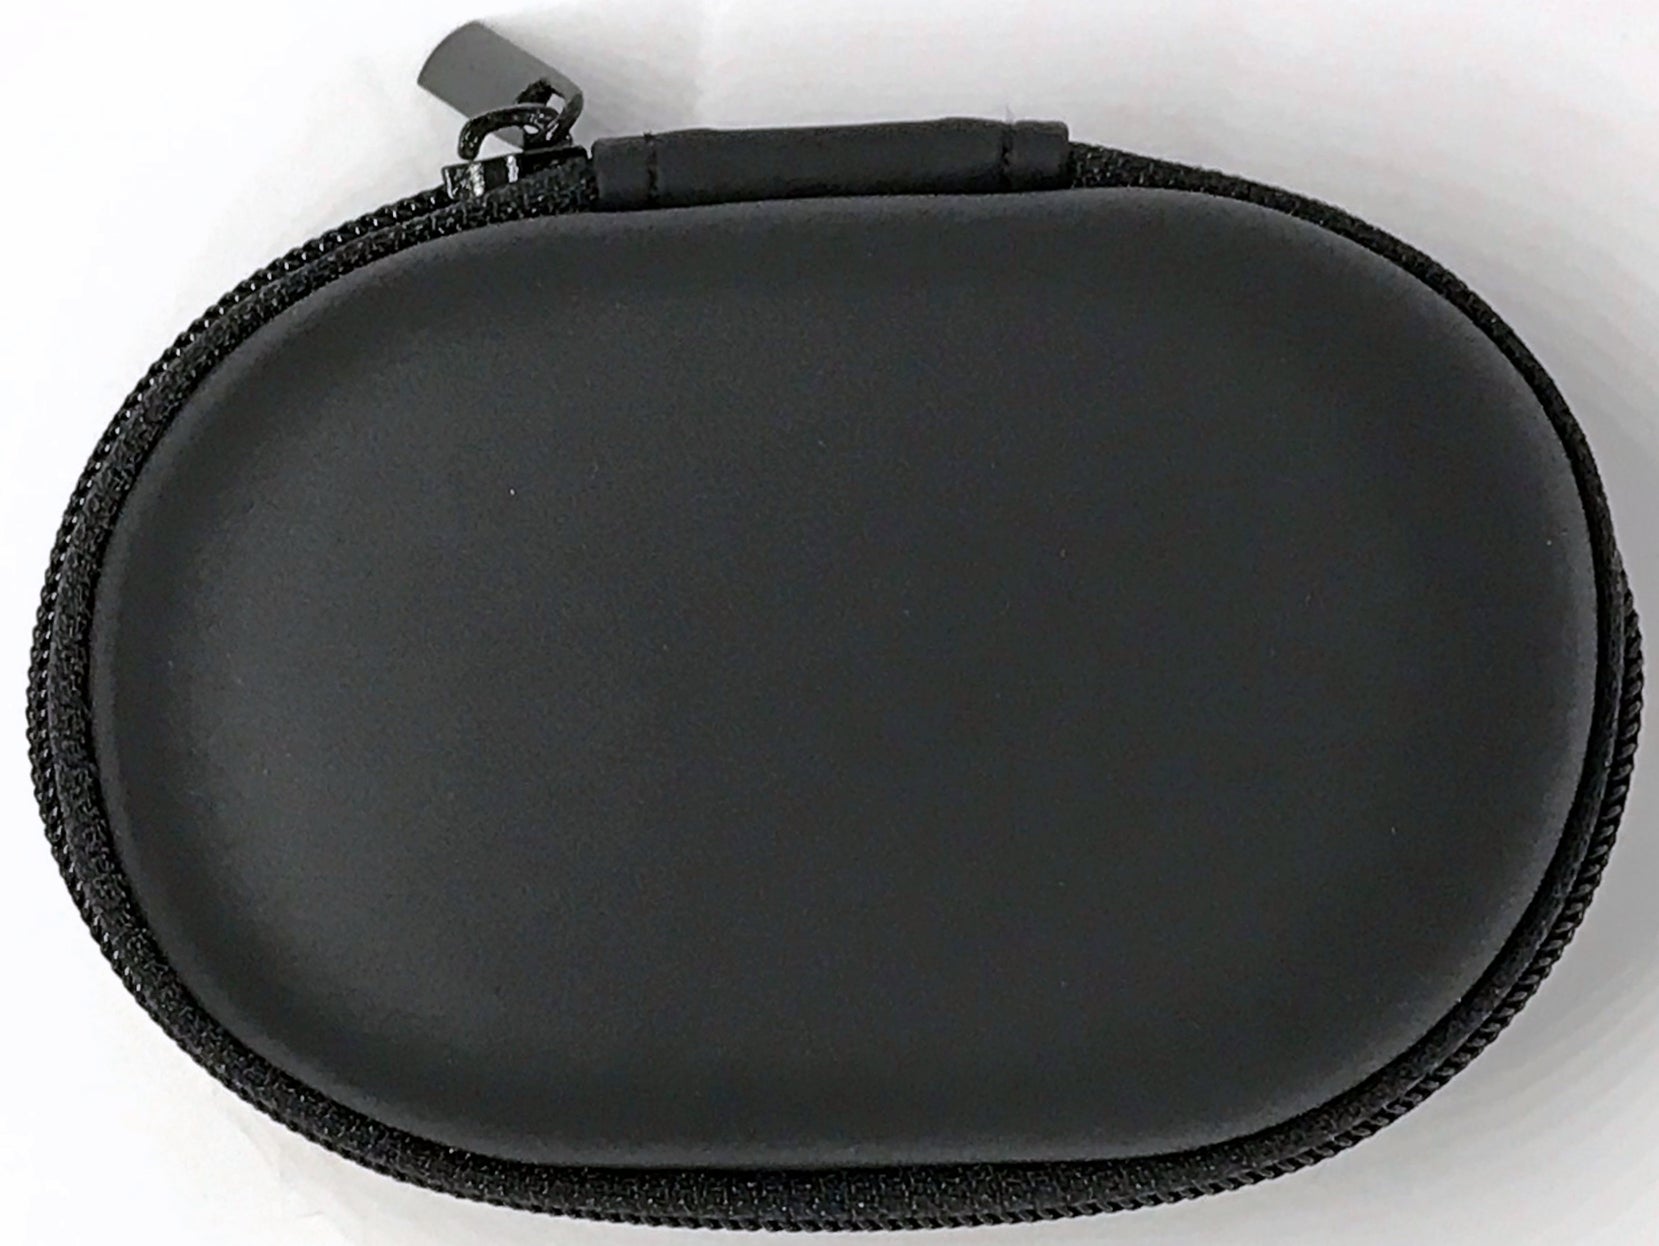 Hard Carrying Case Zippered For Bose Bluetooth Headset Series 1 2 Right Left In-Ear - CentralSound